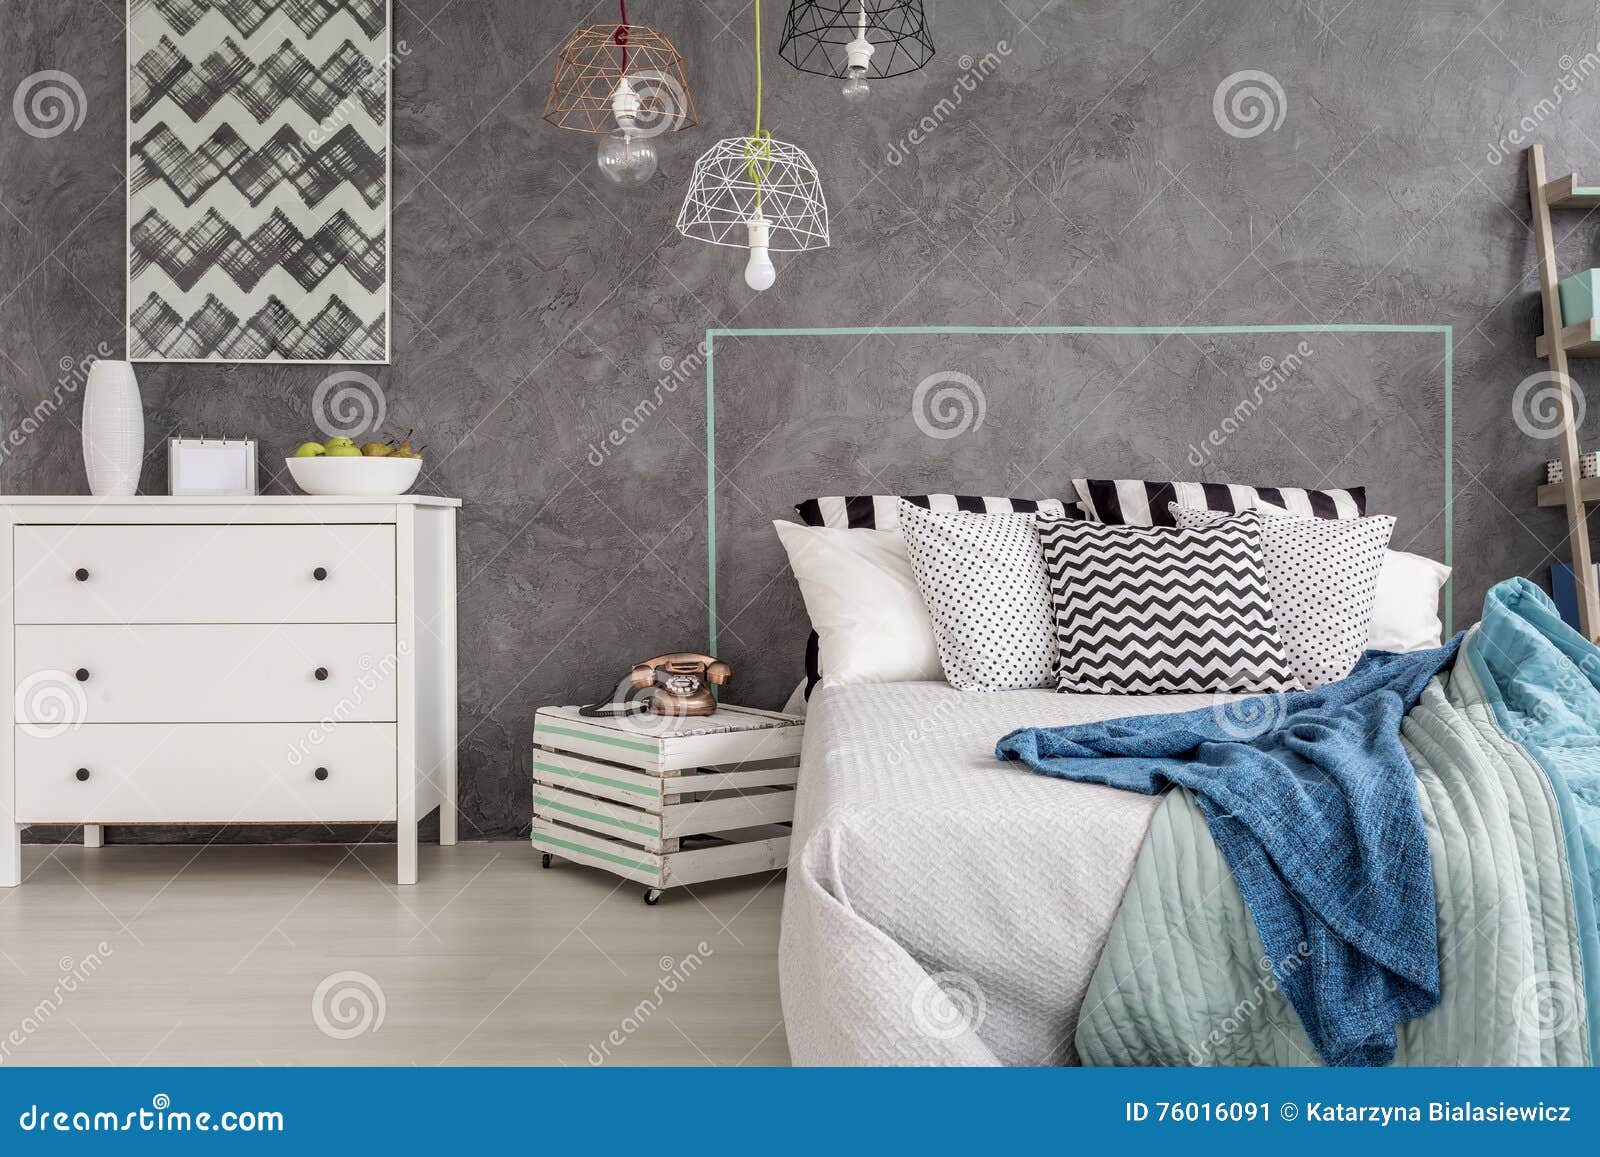 bedroom with positive enegy